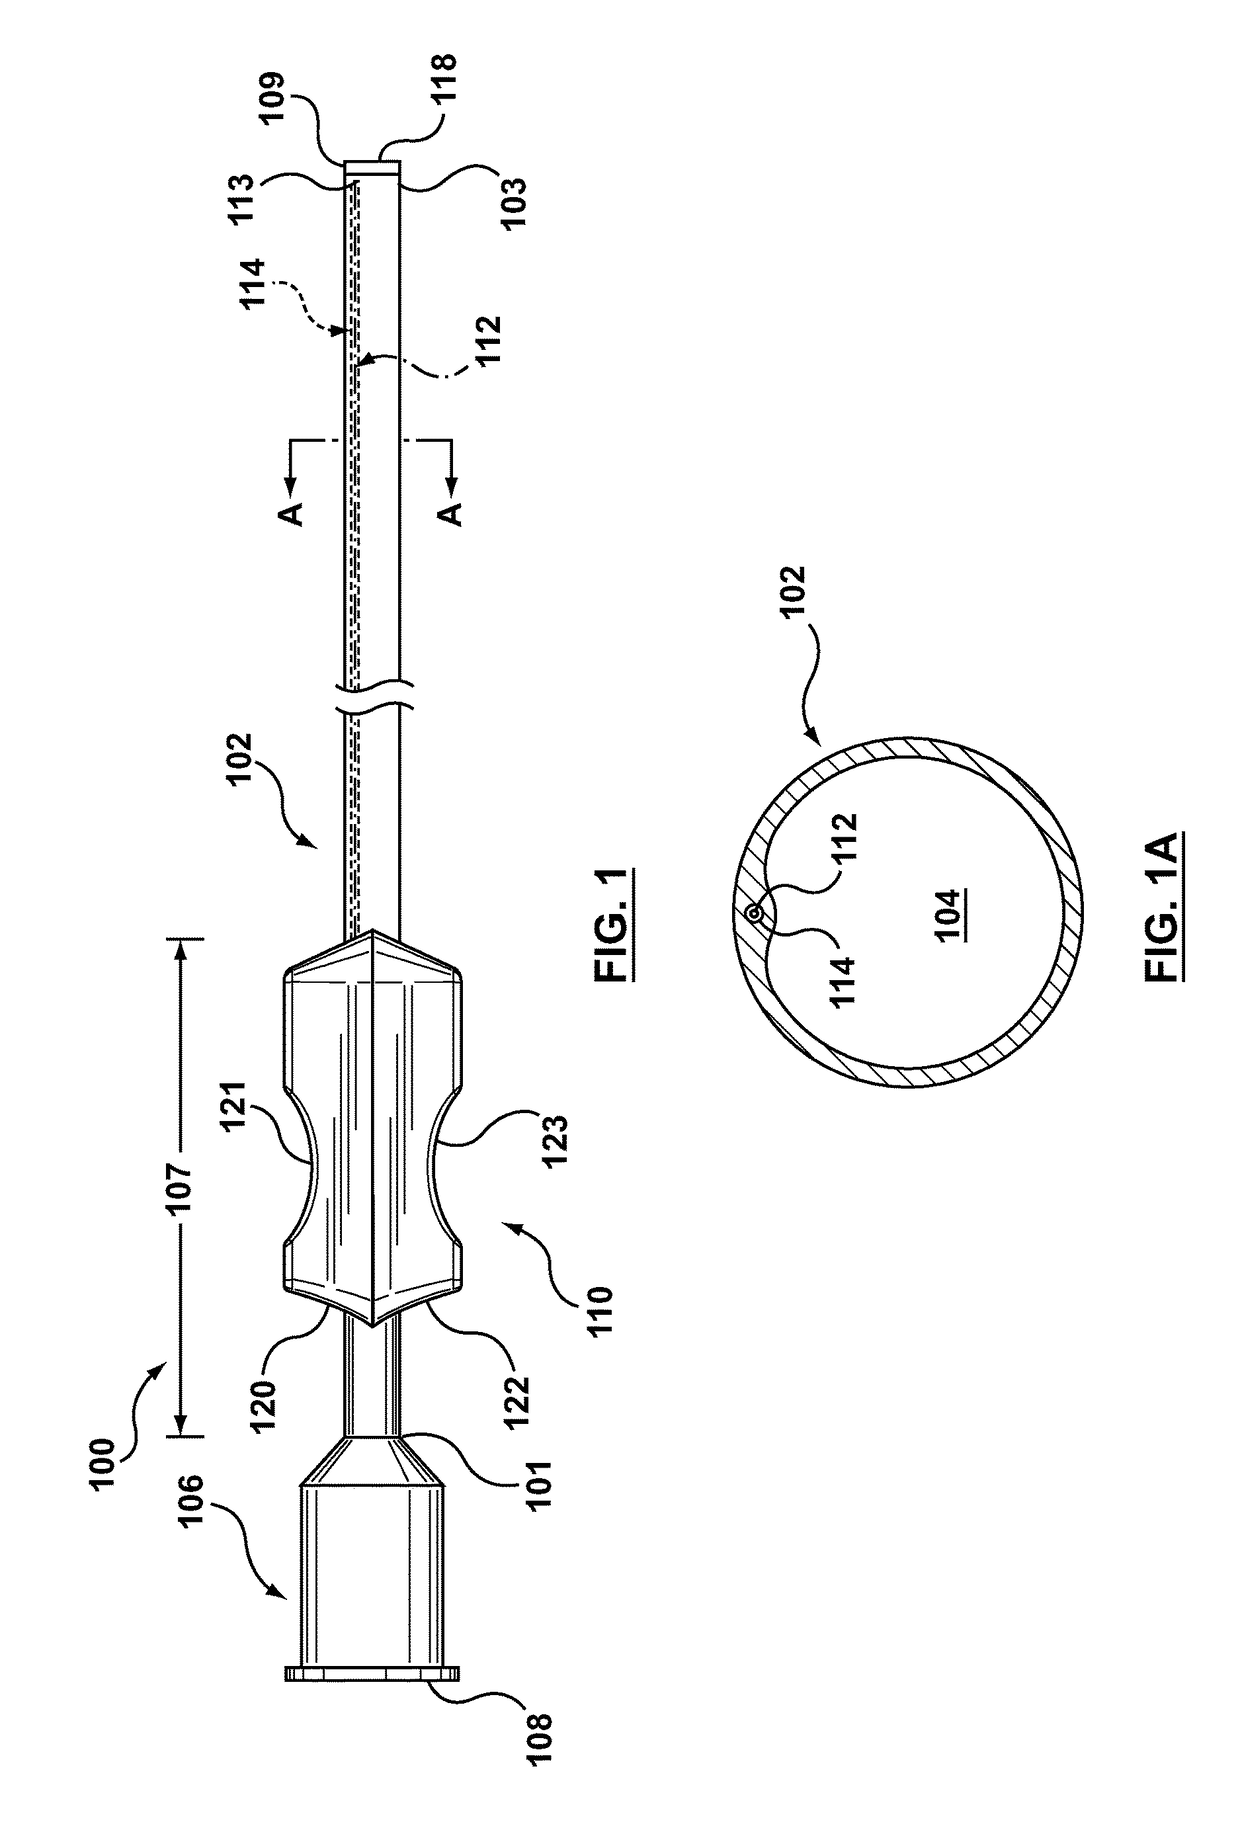 Catheter pull wire actuation mechanism